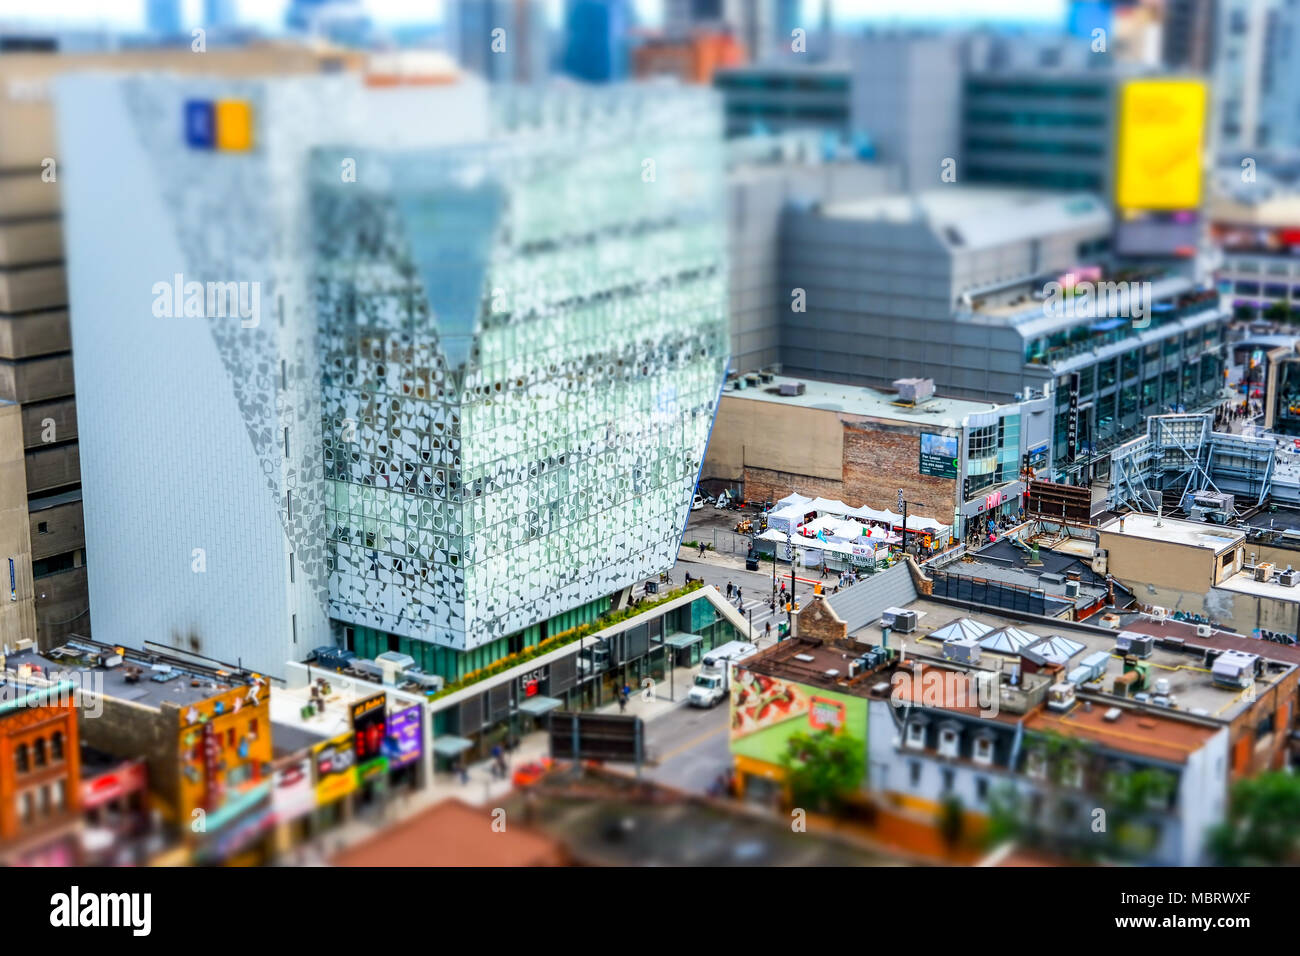 Interesting, diorama effect giving miniature details to the Toronto city centre, showing streets and the modern University building in the background. Stock Photo